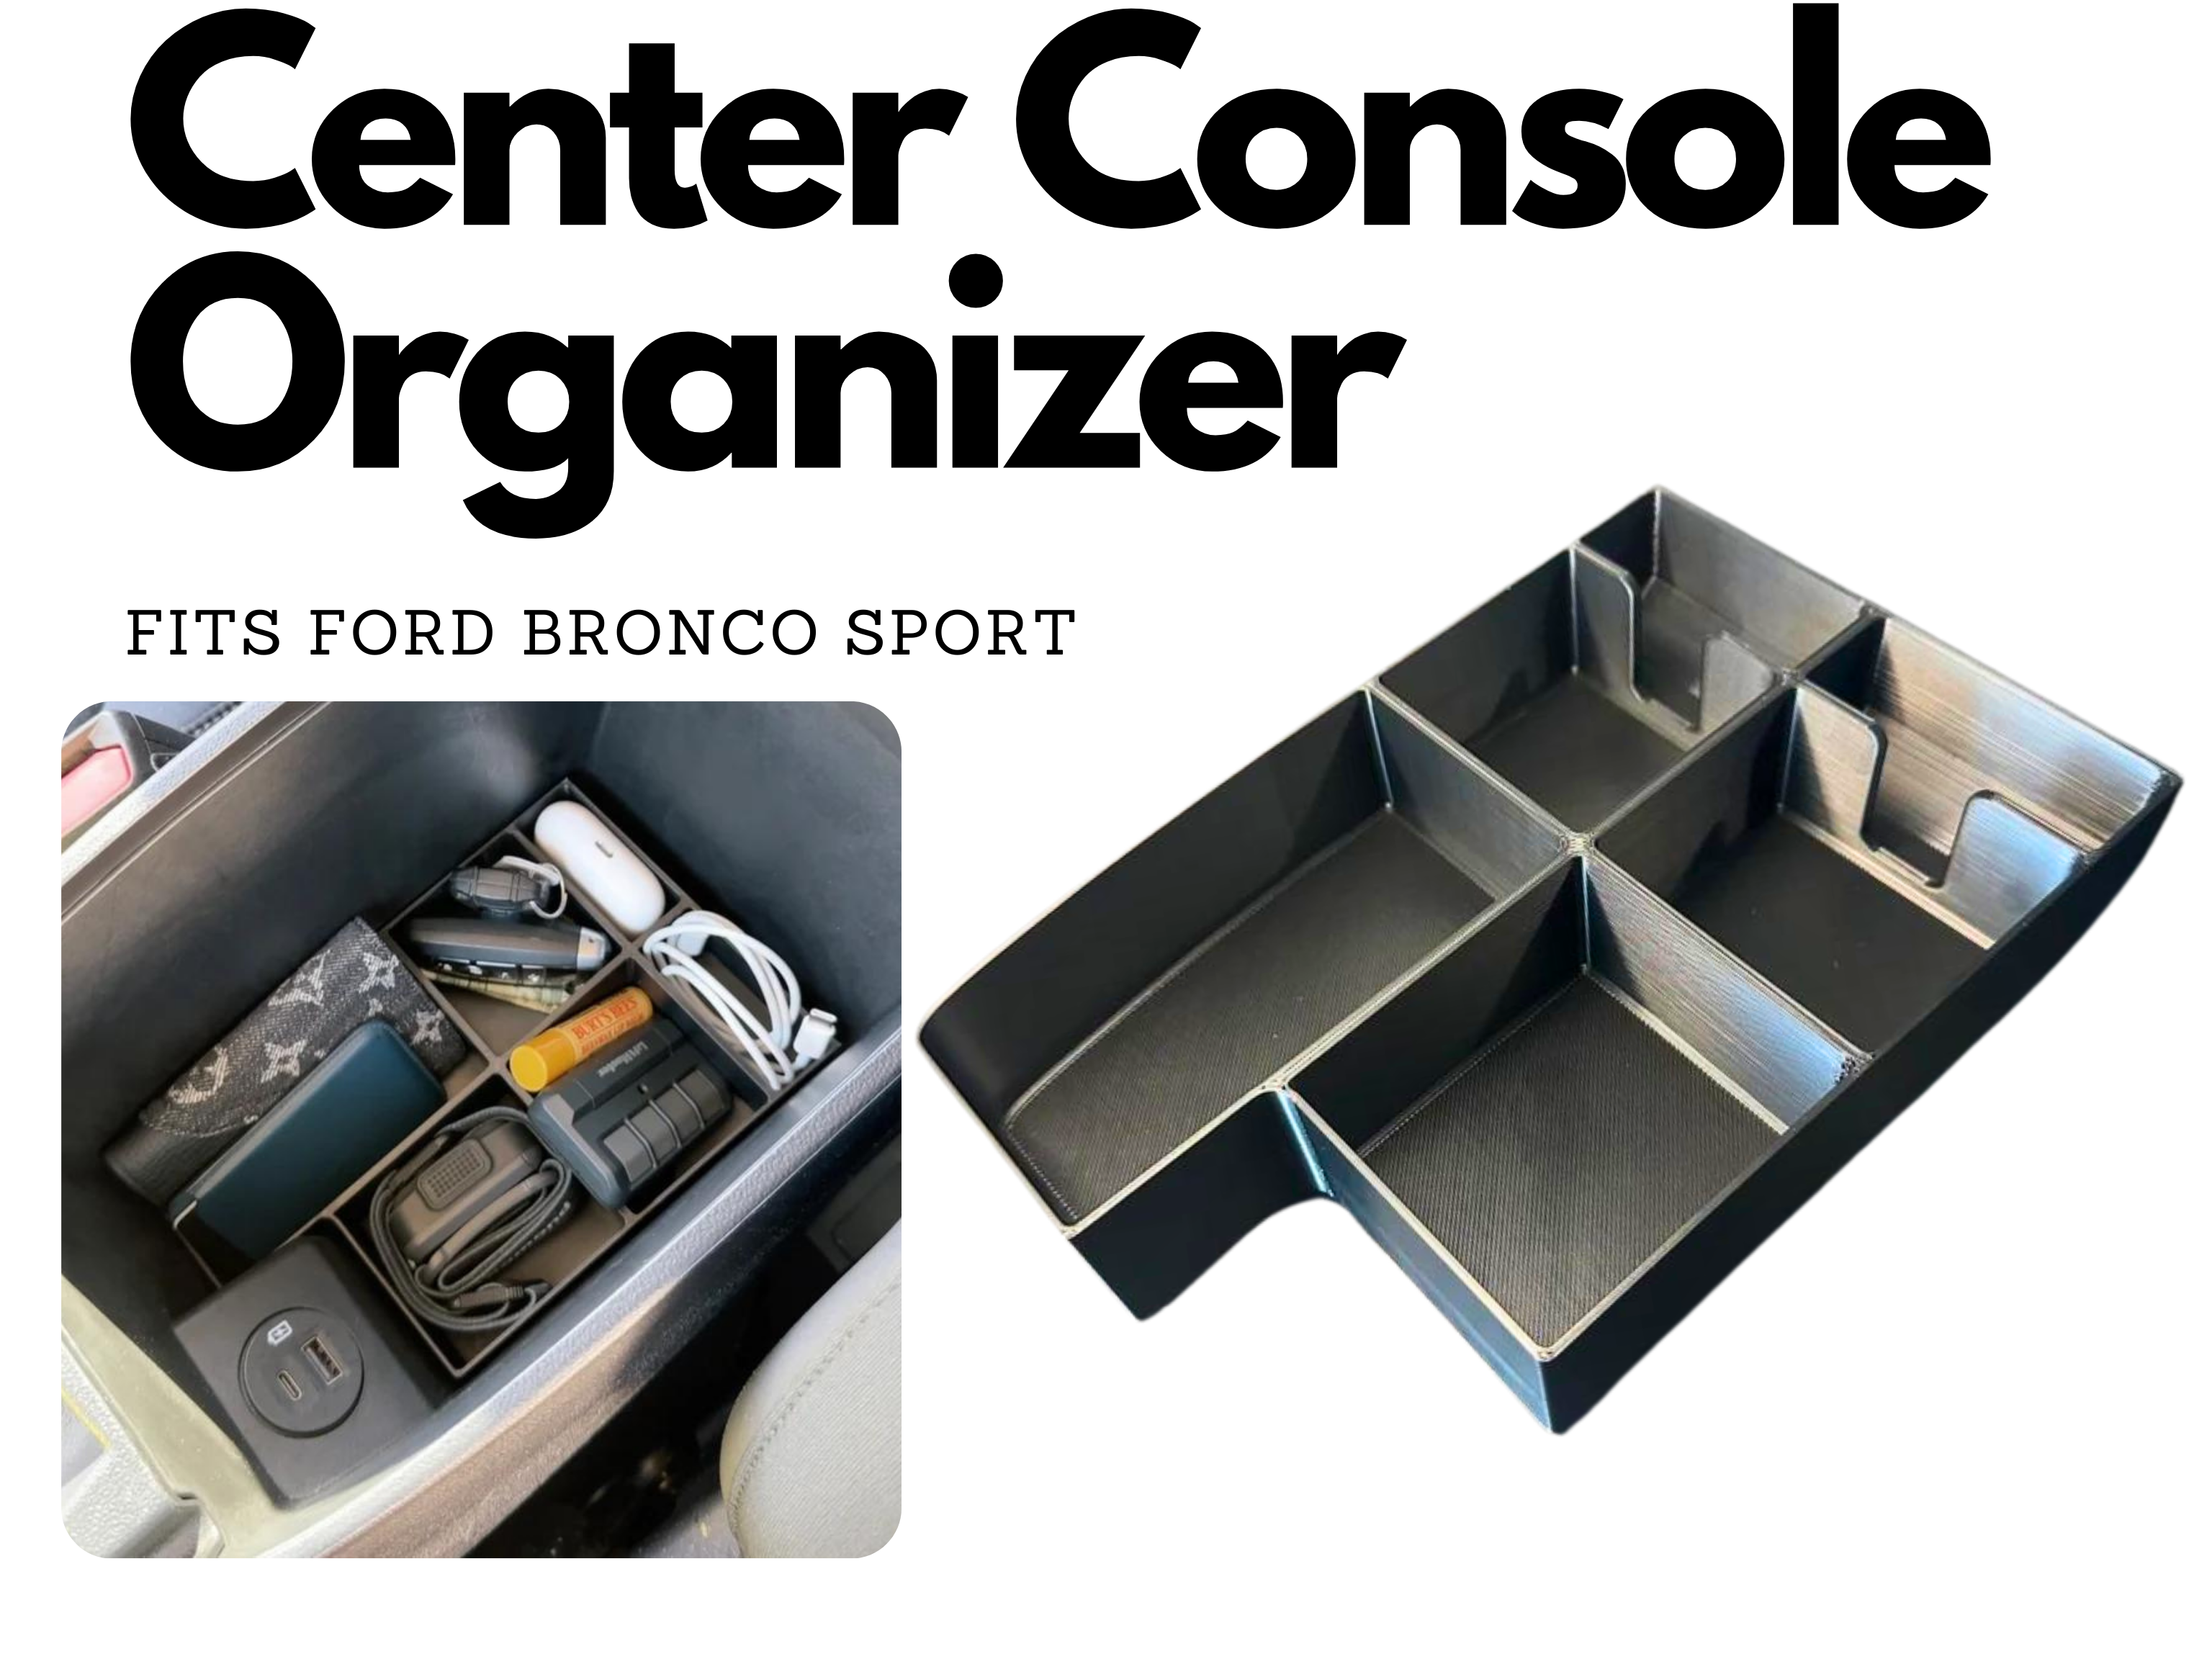 Divider Organizer for Ford Bronco Sport 21, 22, 23, 24  Center Console with Our Multi-Compartment Divider Organizer